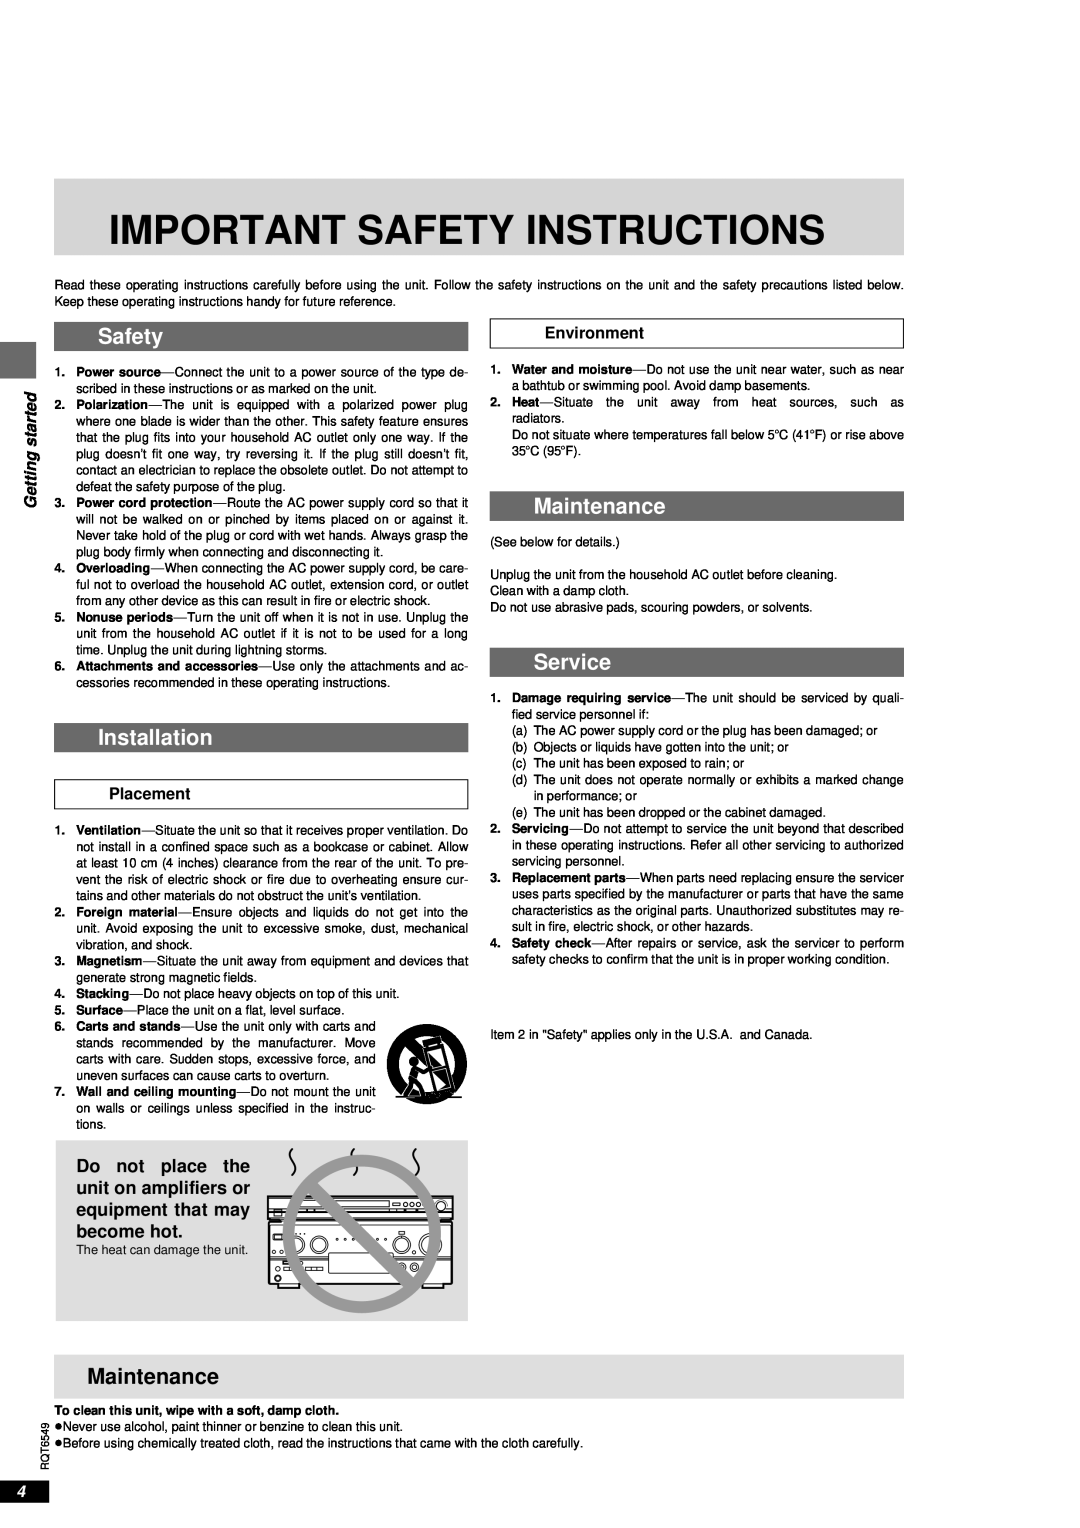 Panasonic DVD-RP82 warranty Maintenance, Important Safety Instructions, Installation, Service, Getting started, Placement 